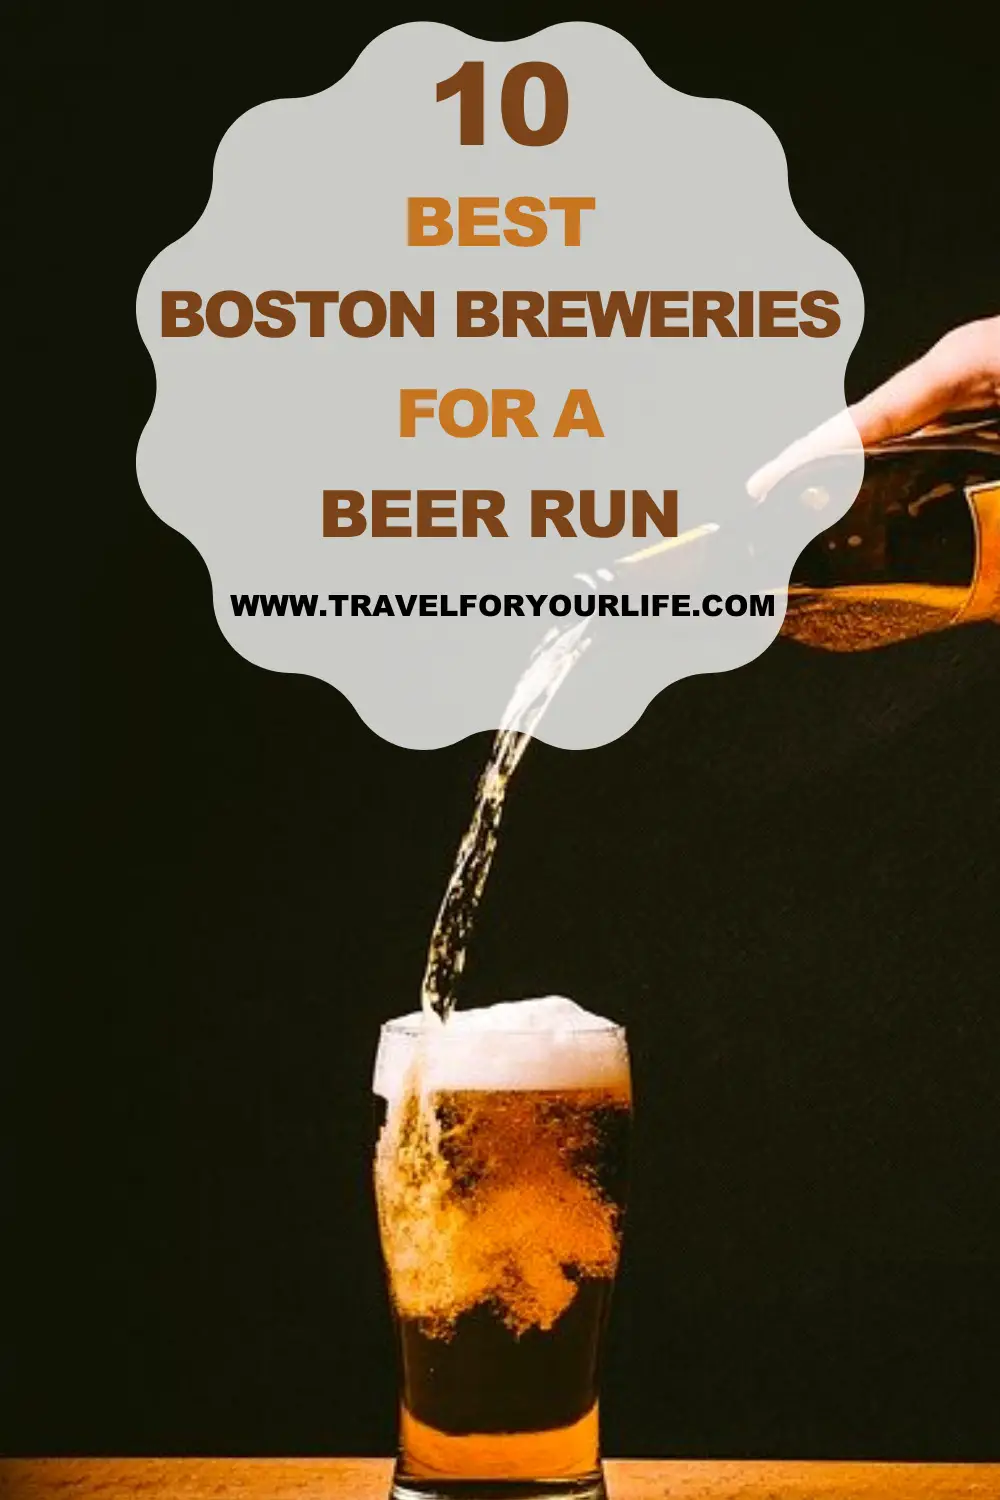 10 Best Boston Breweries for a Beer Run